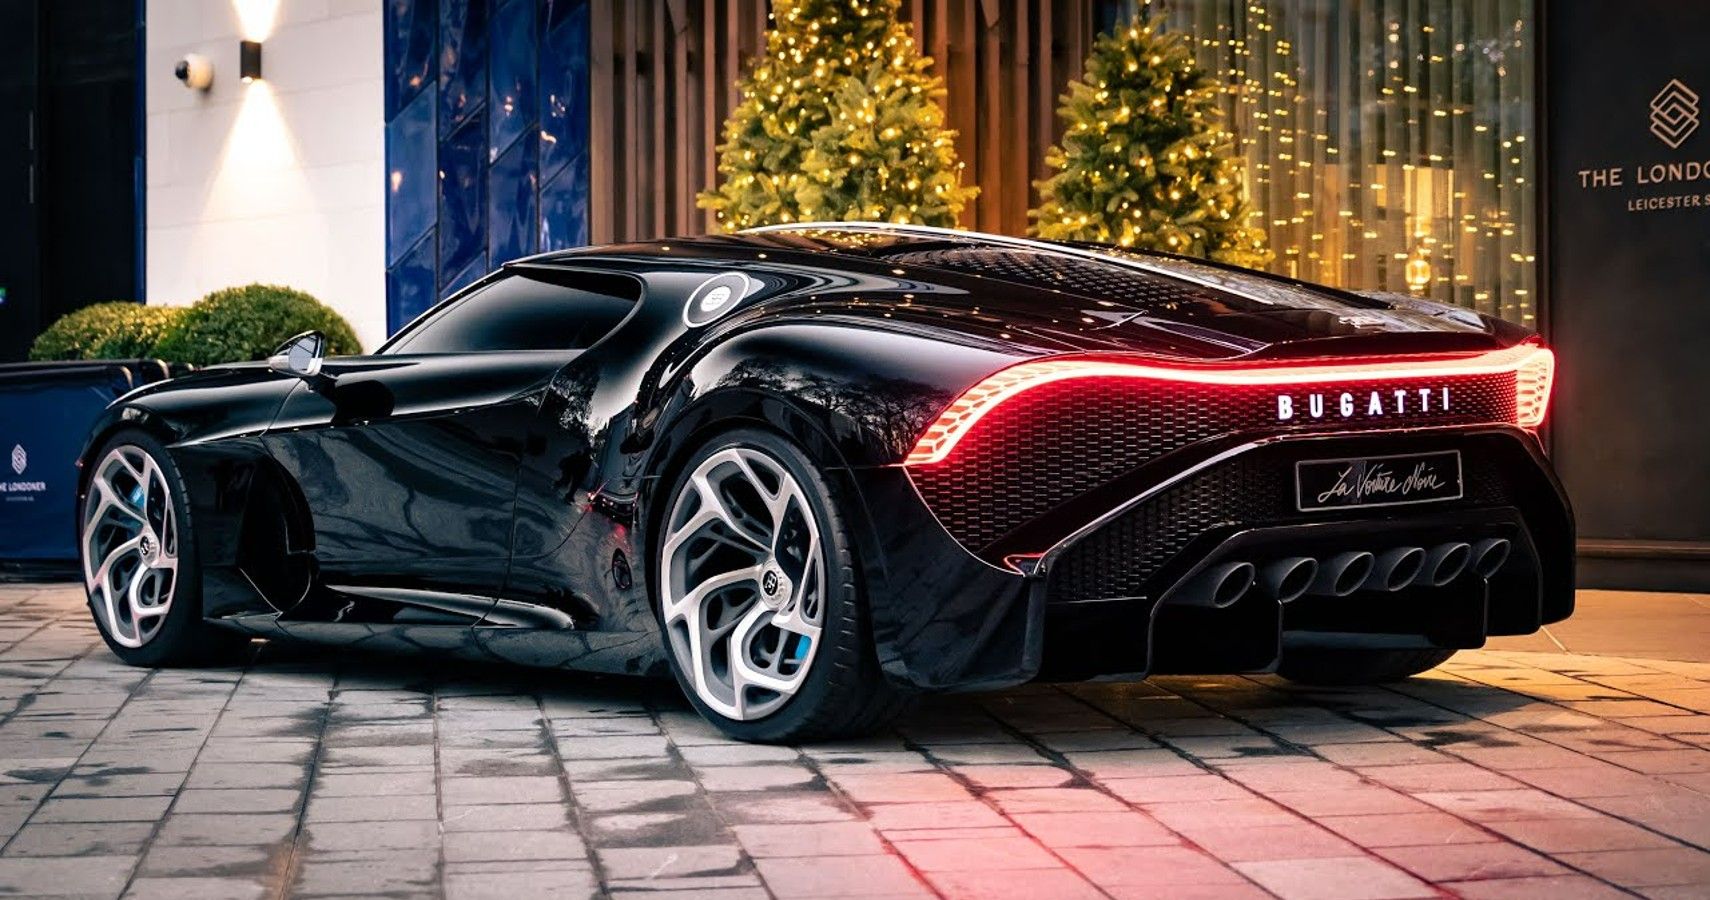 $18 Million Bugatti Once Dubbed The World’s Most Expensive New Car Caught In Public